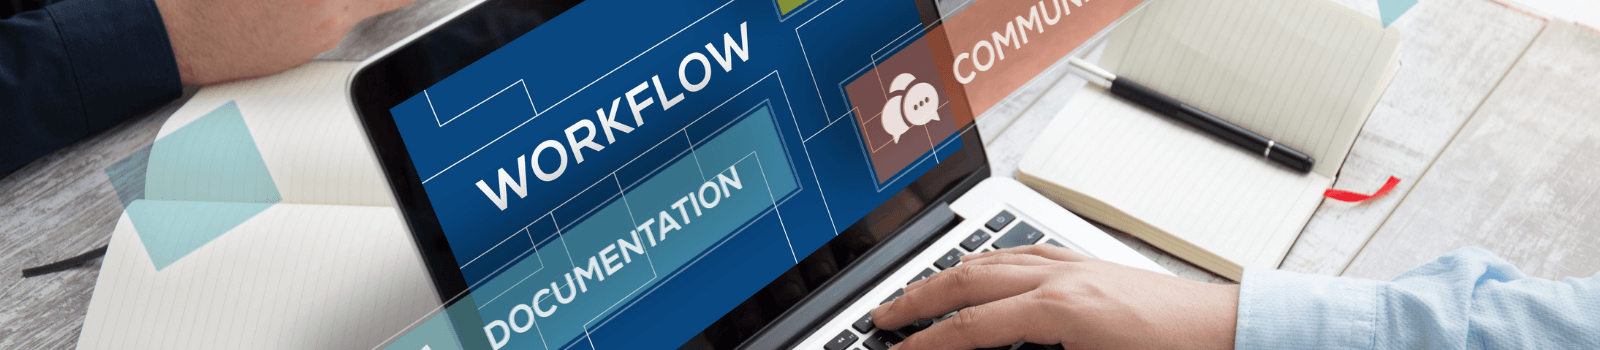 Usage of Workflow Applications In eGovernance